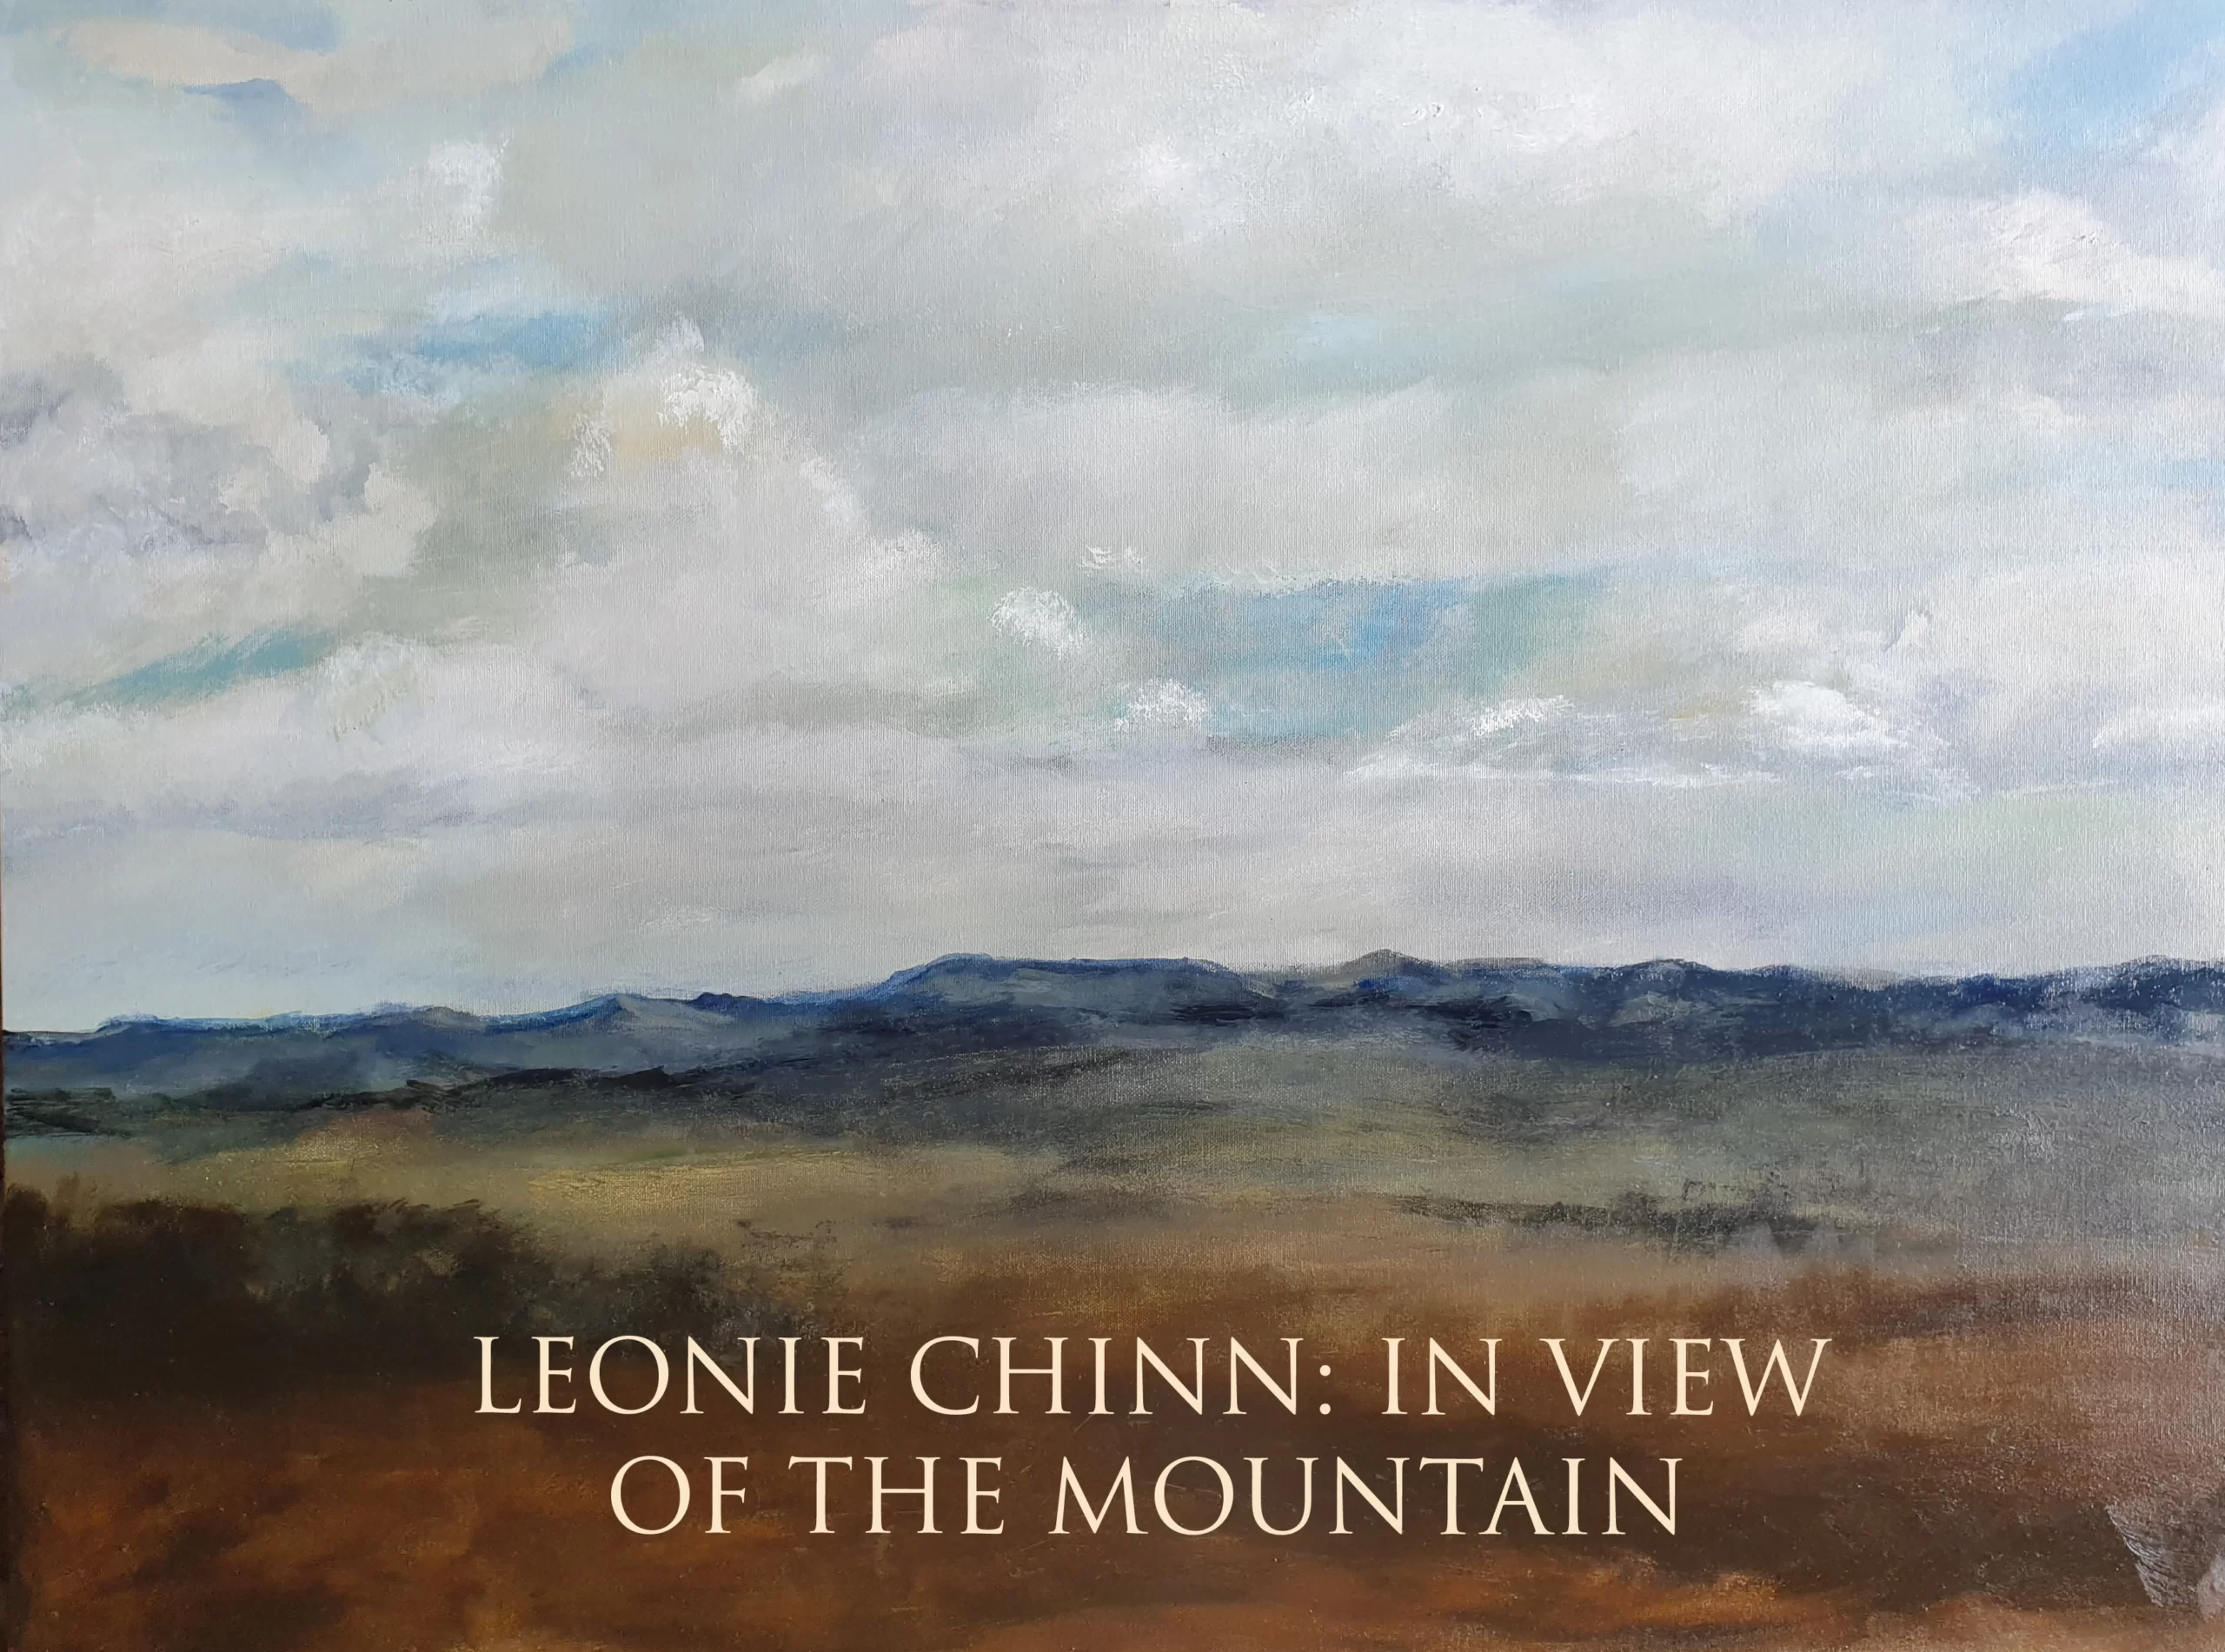 Leonie Chinn "In view of the Mountain" May Exhibition